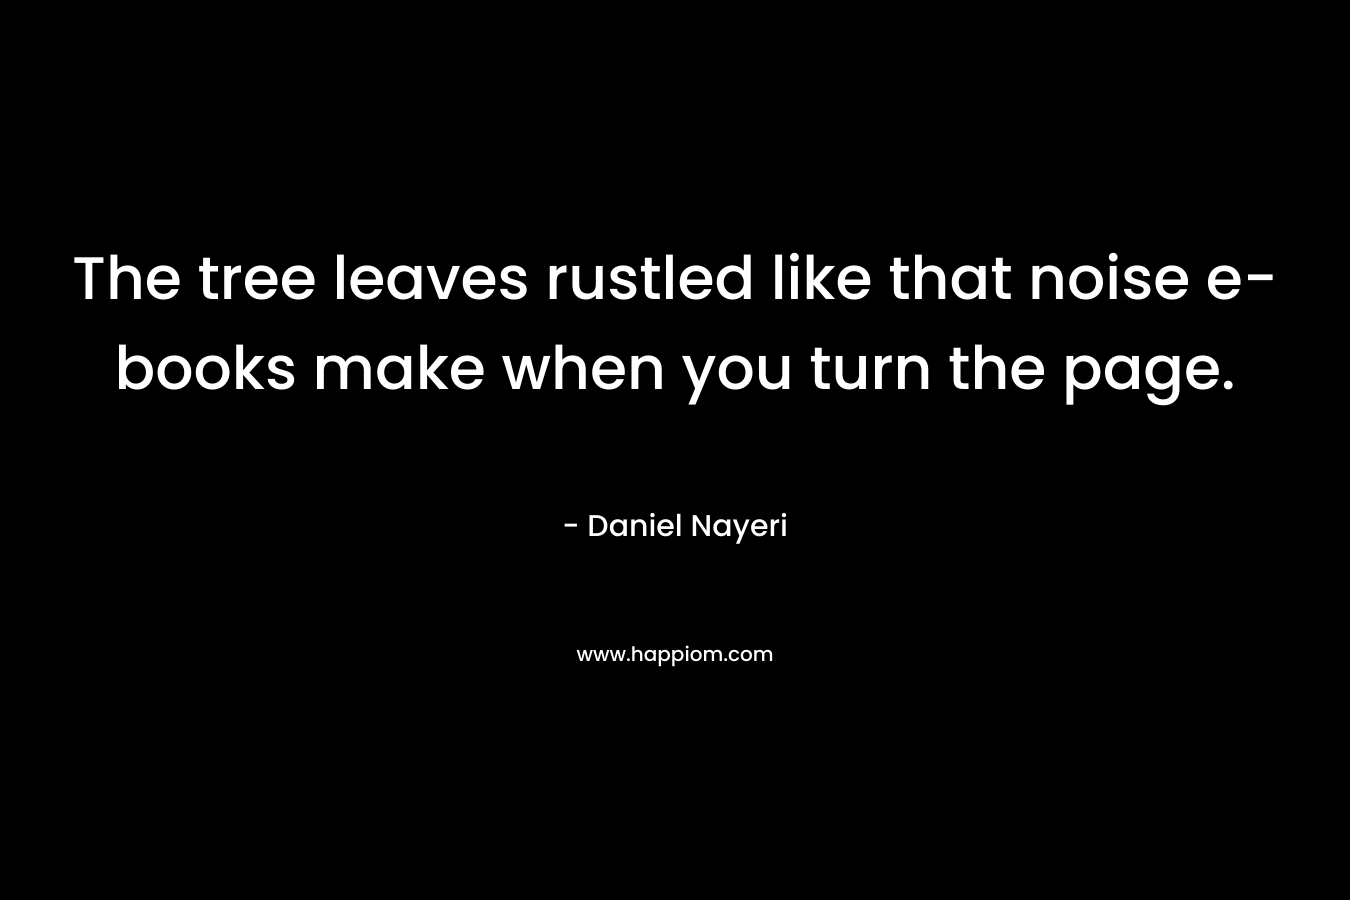 The tree leaves rustled like that noise e-books make when you turn the page. – Daniel Nayeri